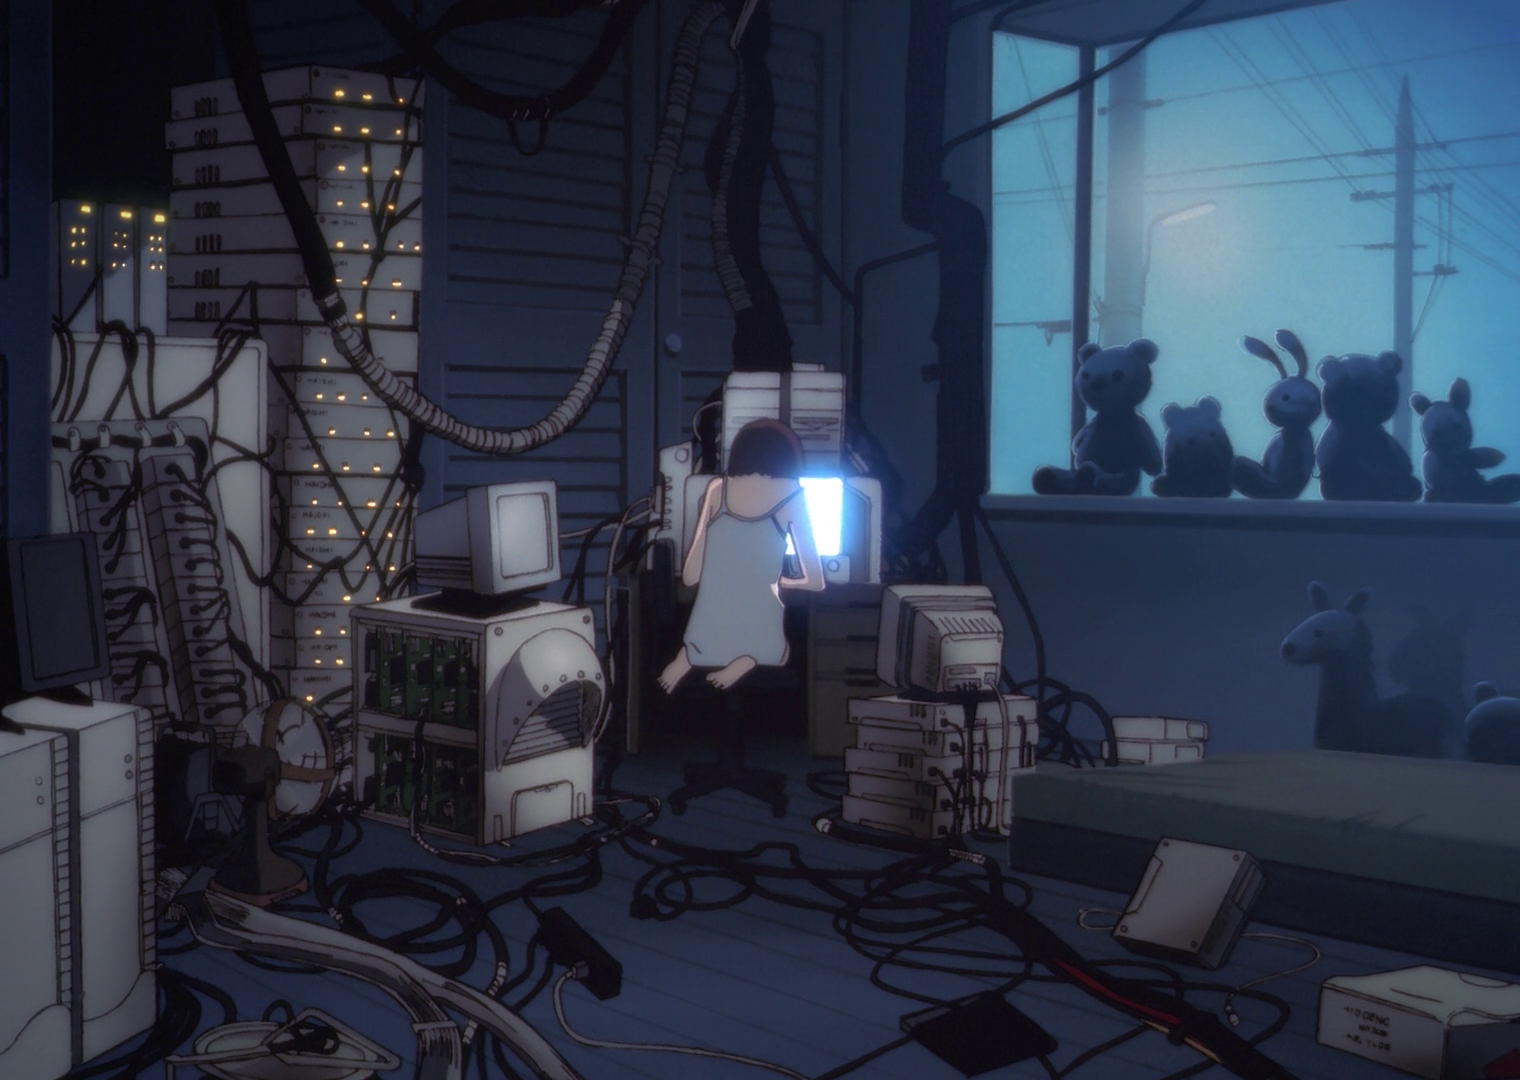 Free Serial Experiments Lain Image